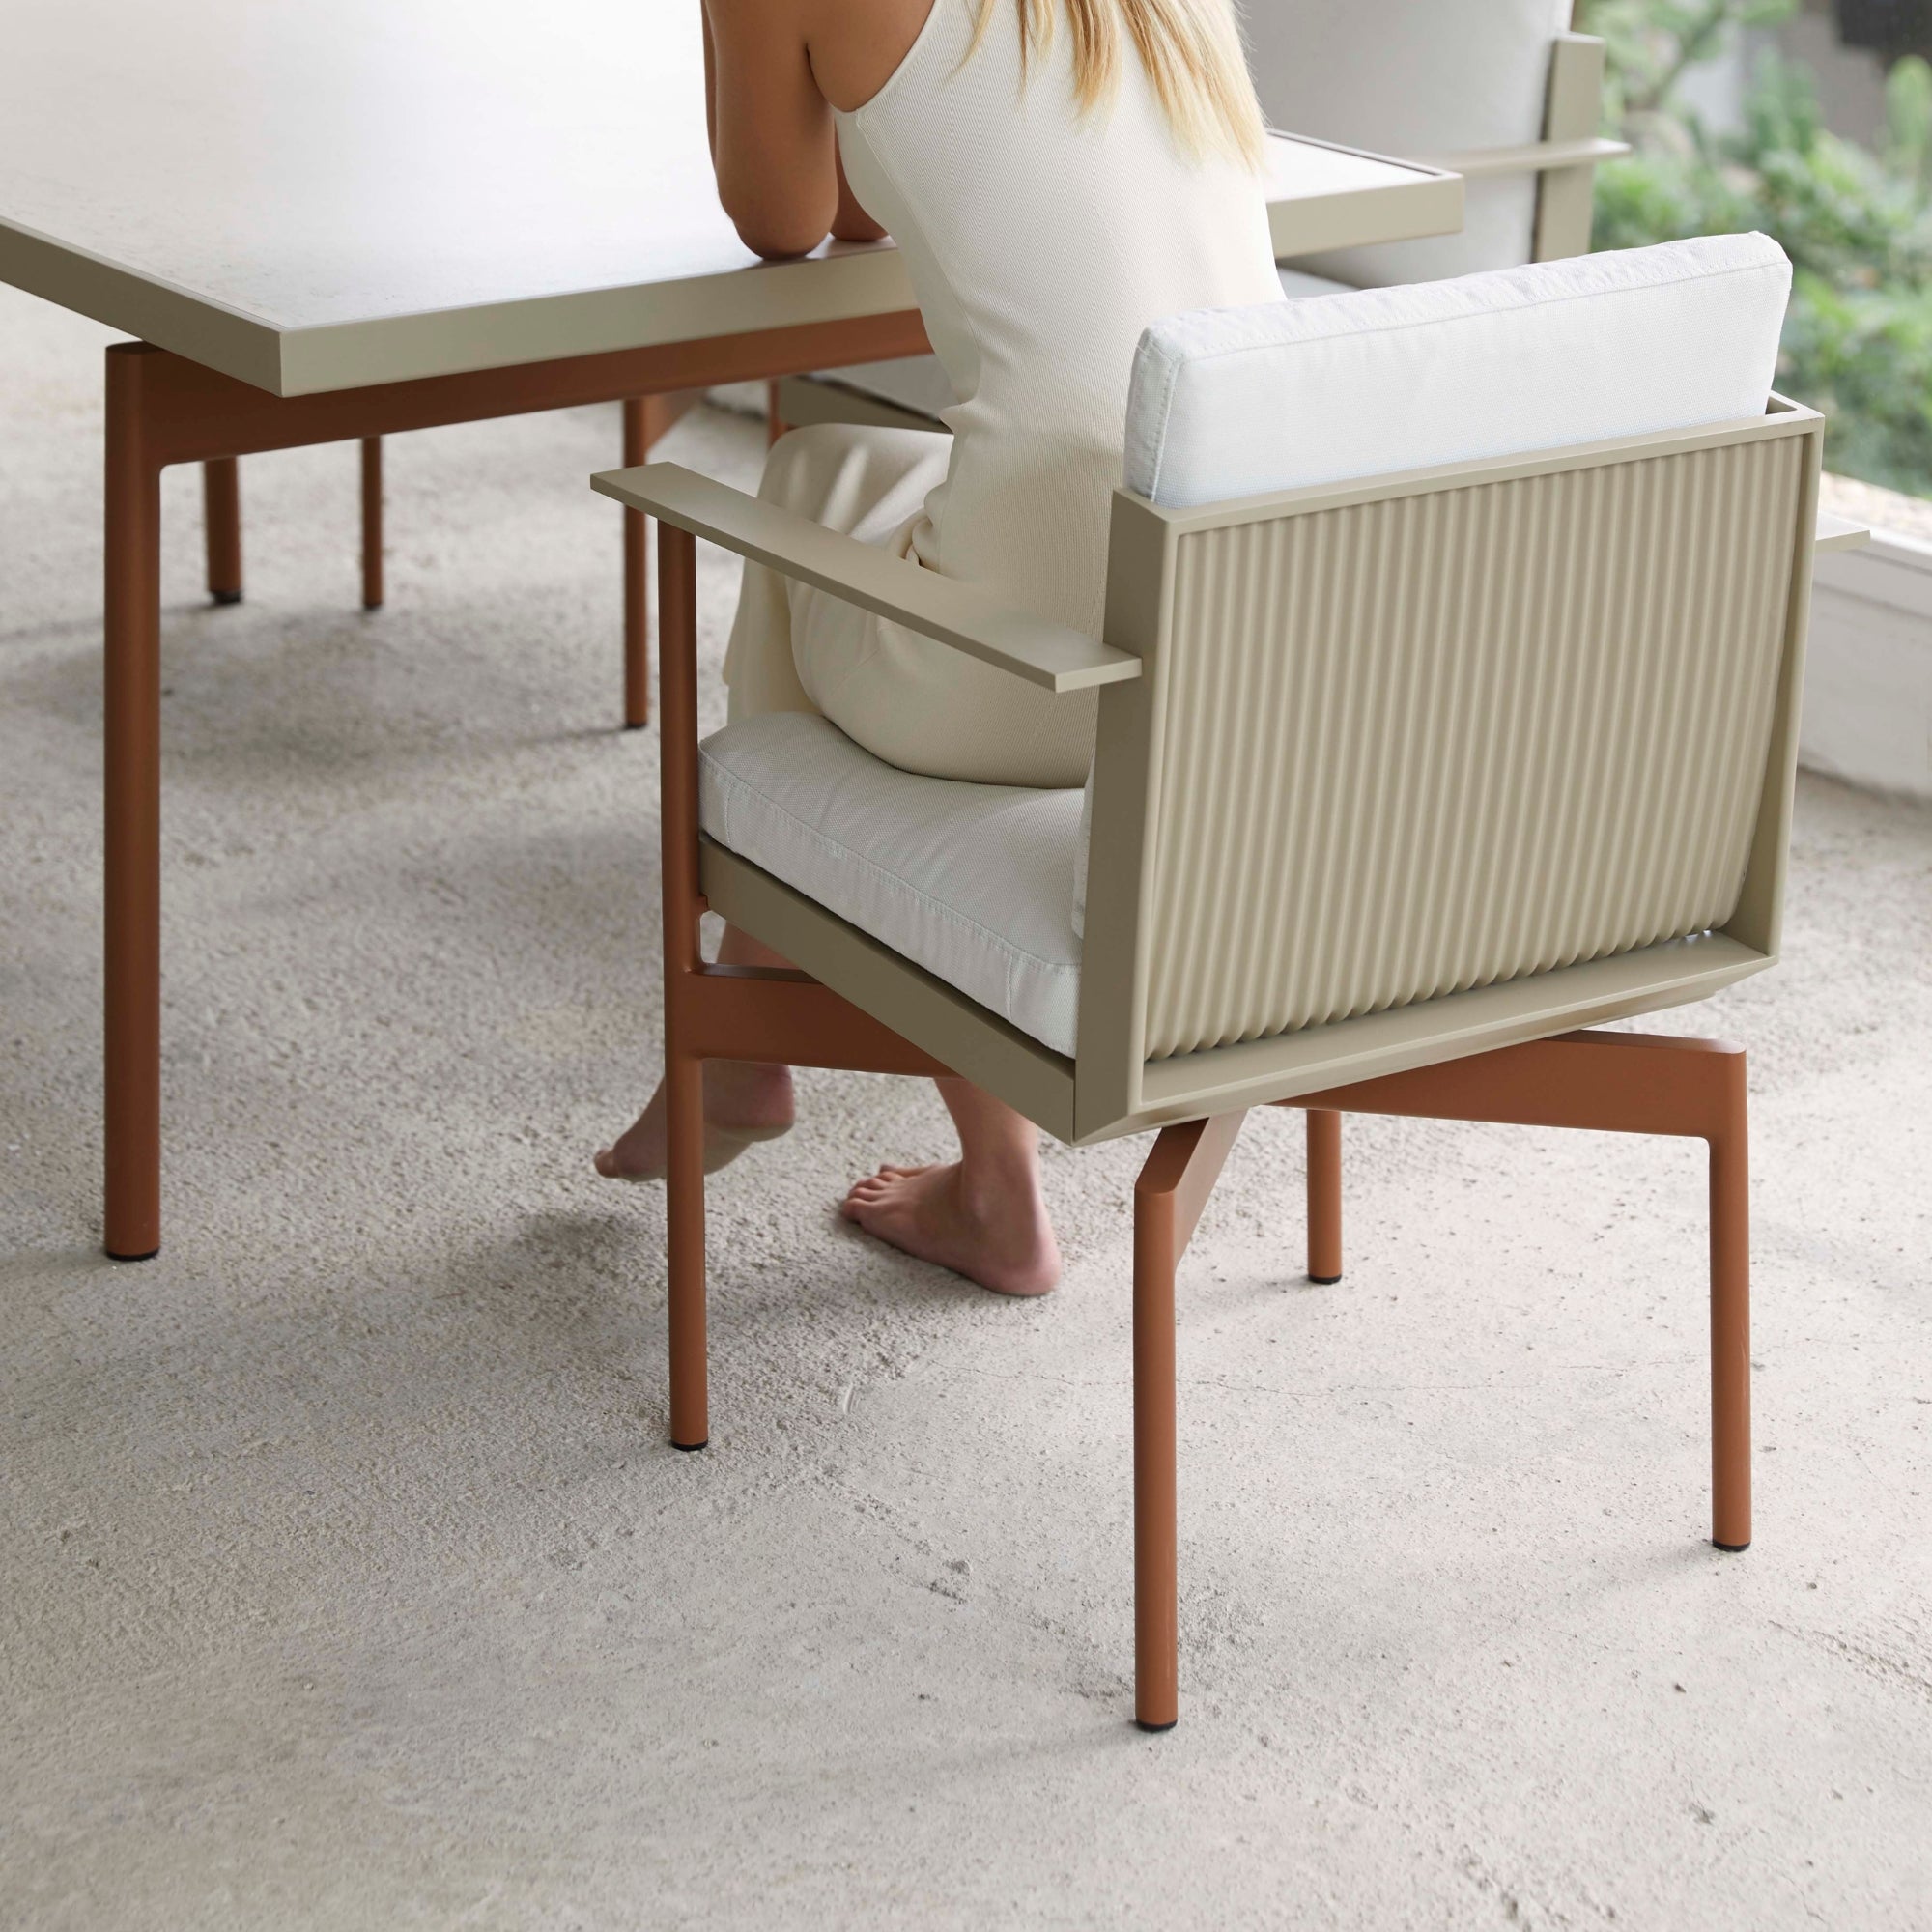 Onde Dining Chair - THAT COOL LIVING